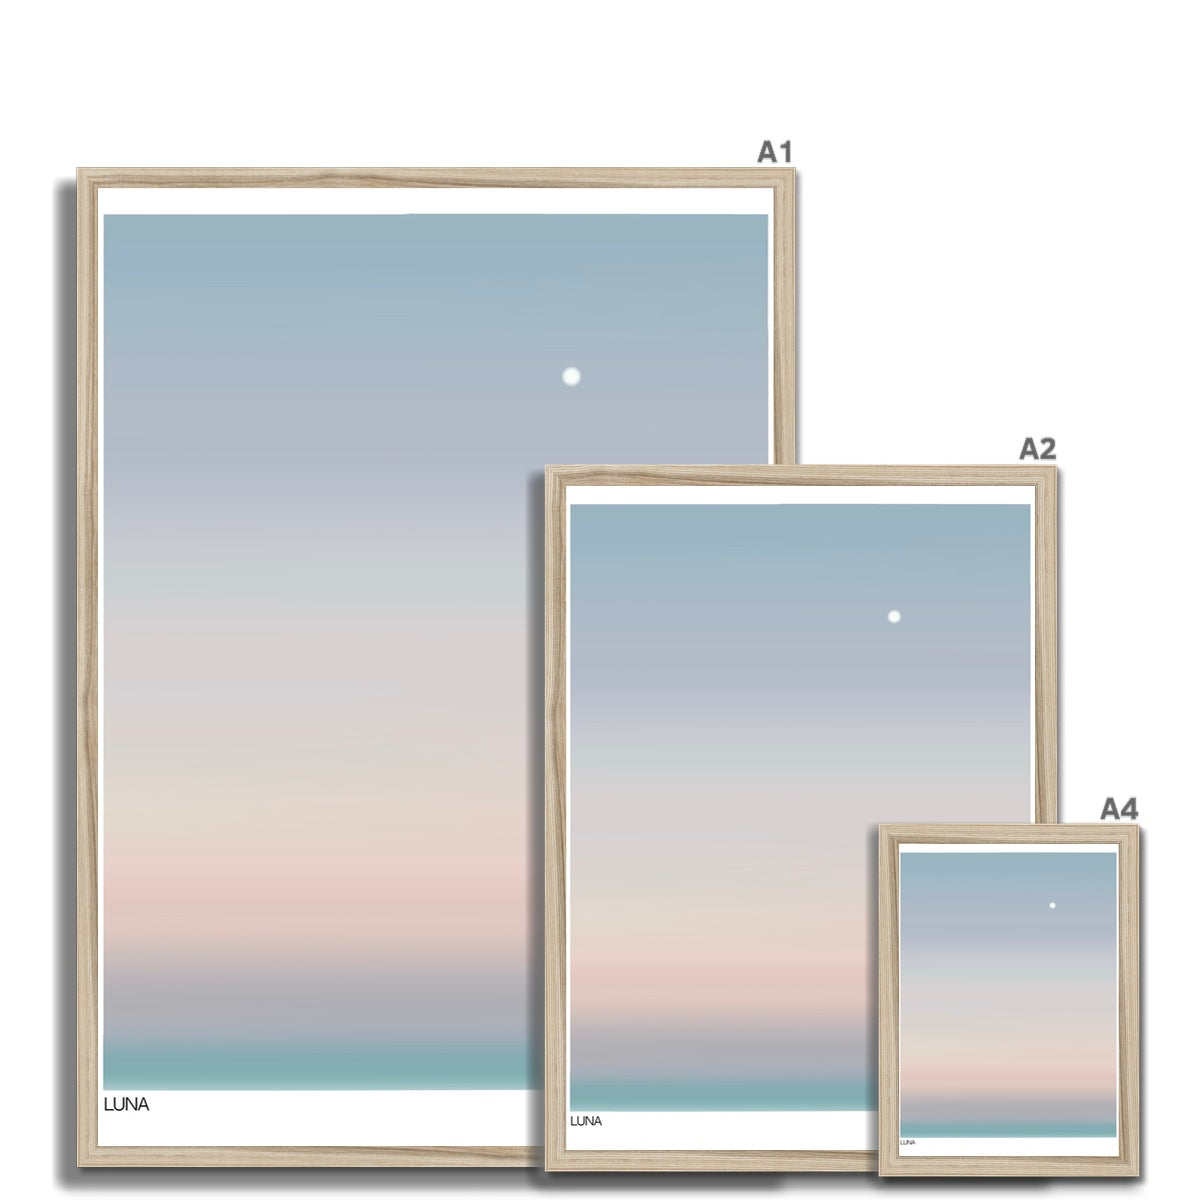 Aura Skies is a collection of wall art prints inspired from coastal sunsets and candy colored skies. The abstract aura posters with dreamy gradients are an aesthetic wall decor must have perfect for dorm or apartment decor.